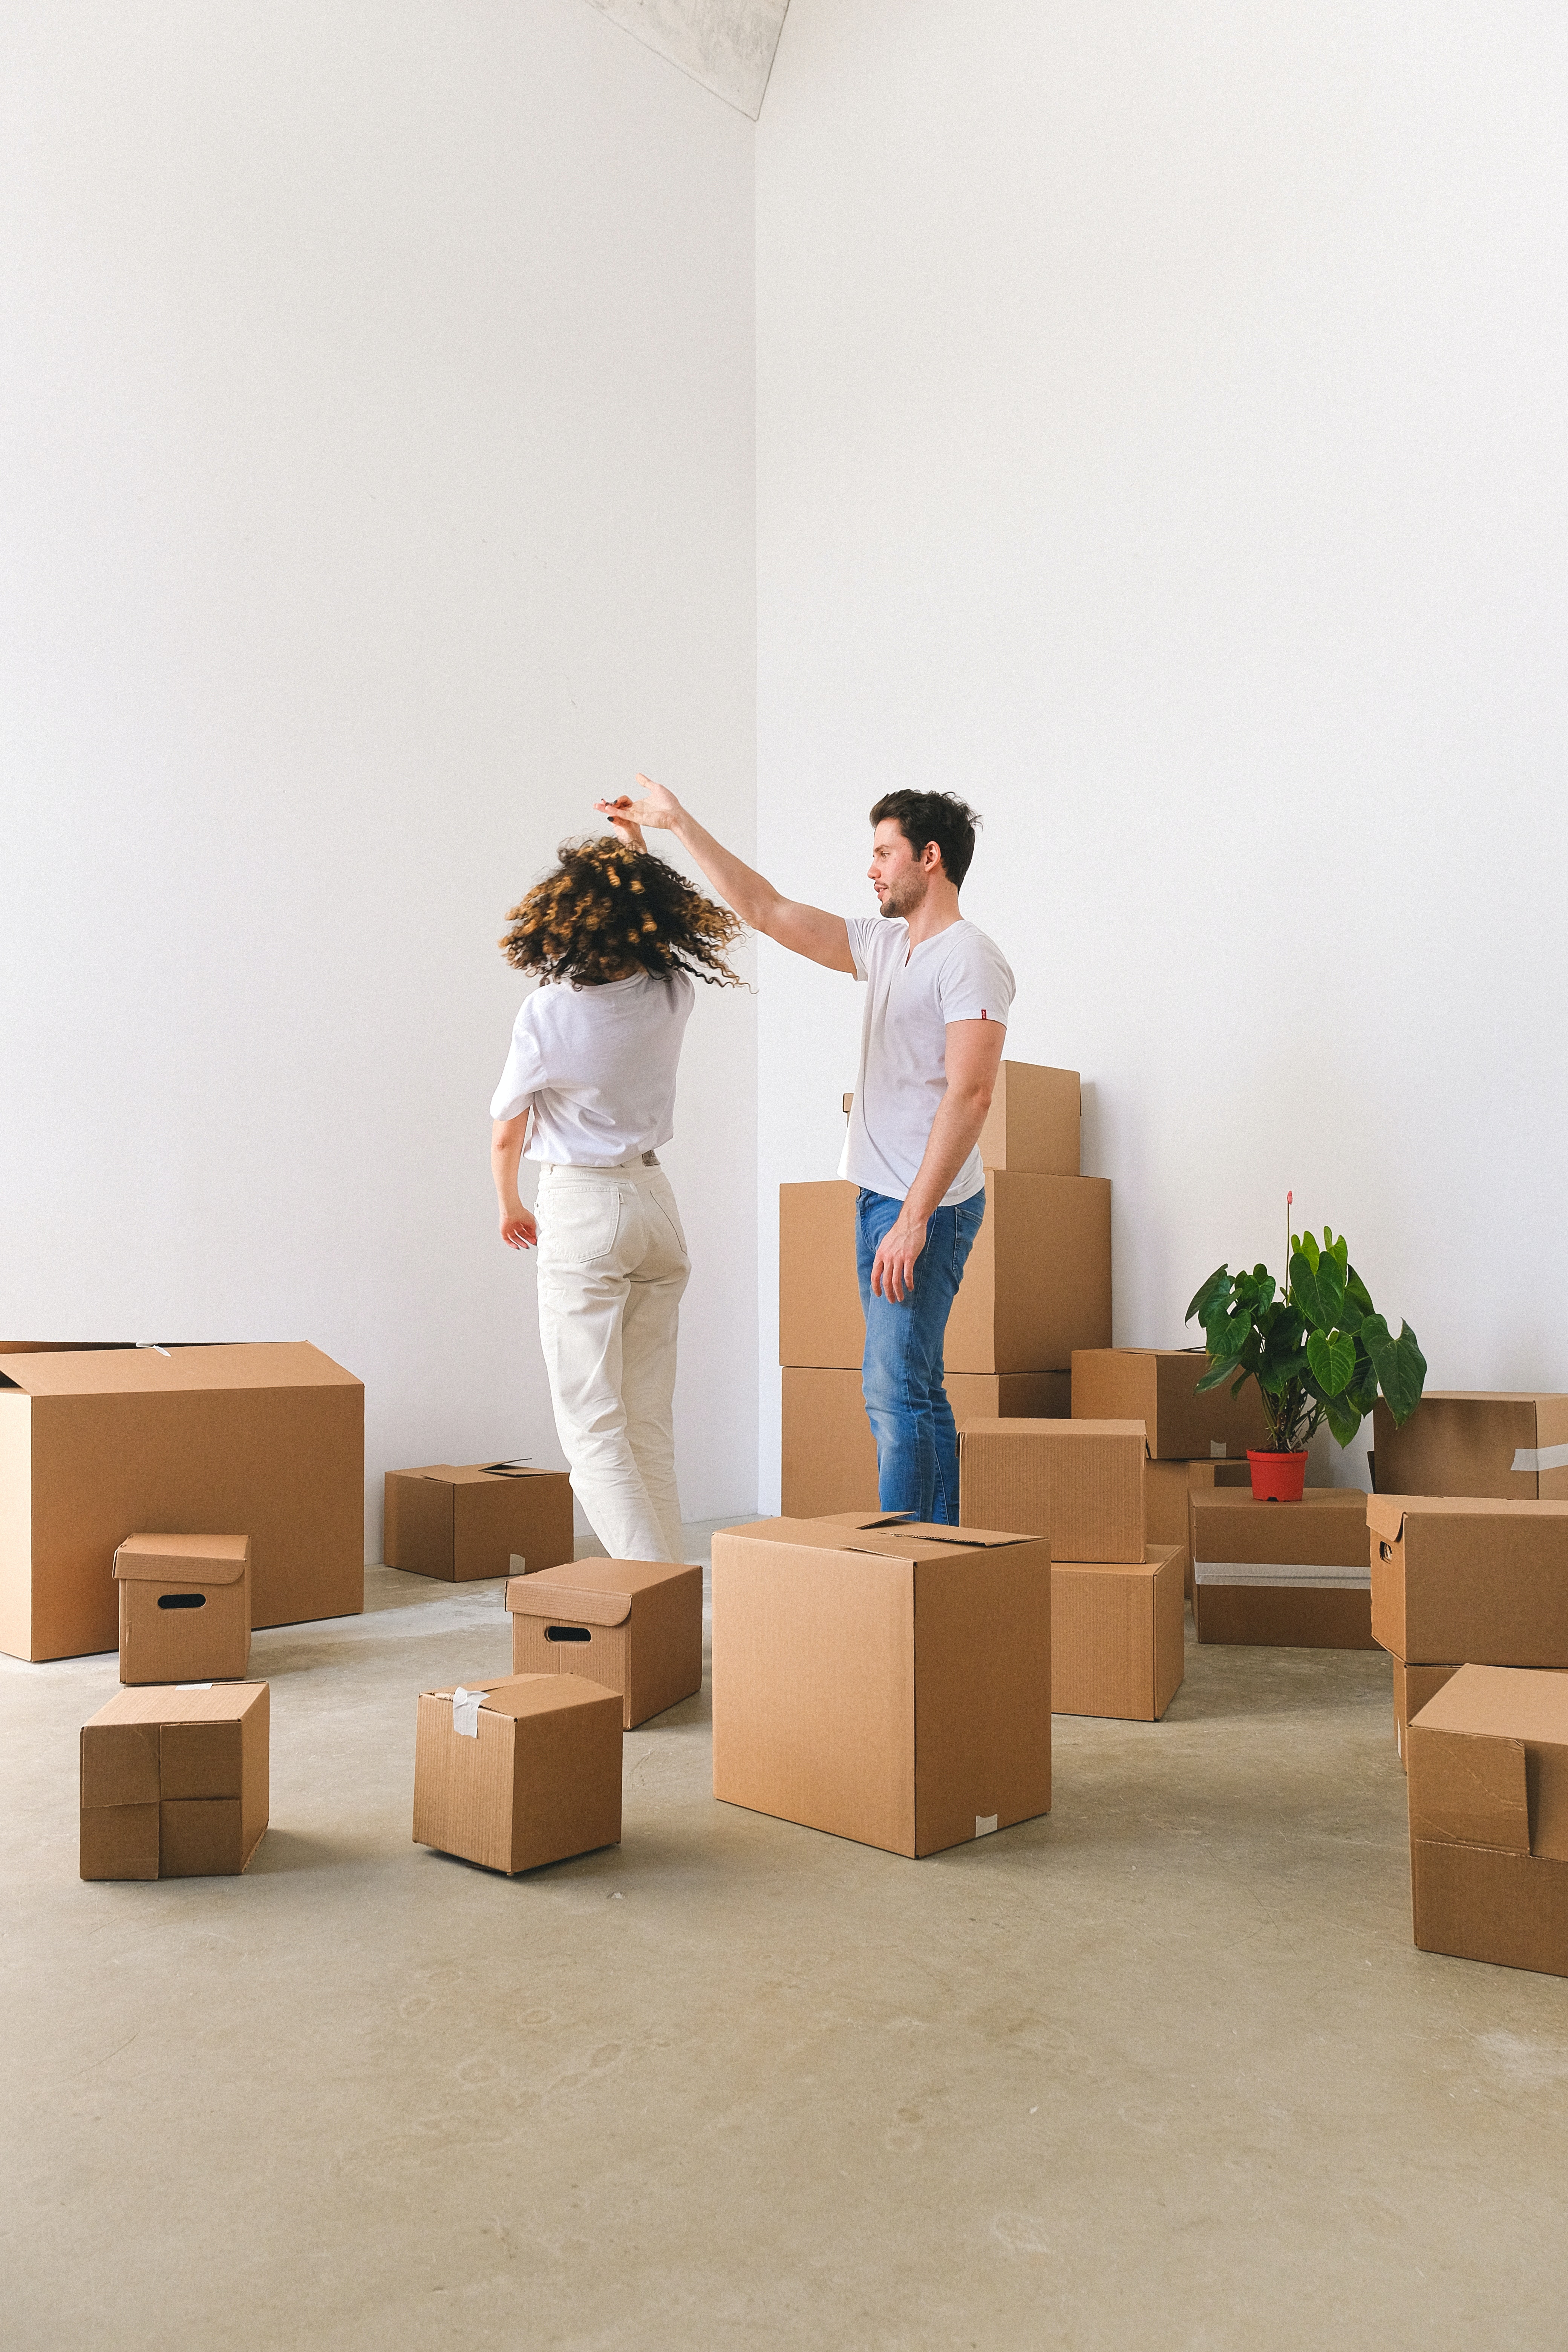 Homeowners Dancing by Moving Boxes